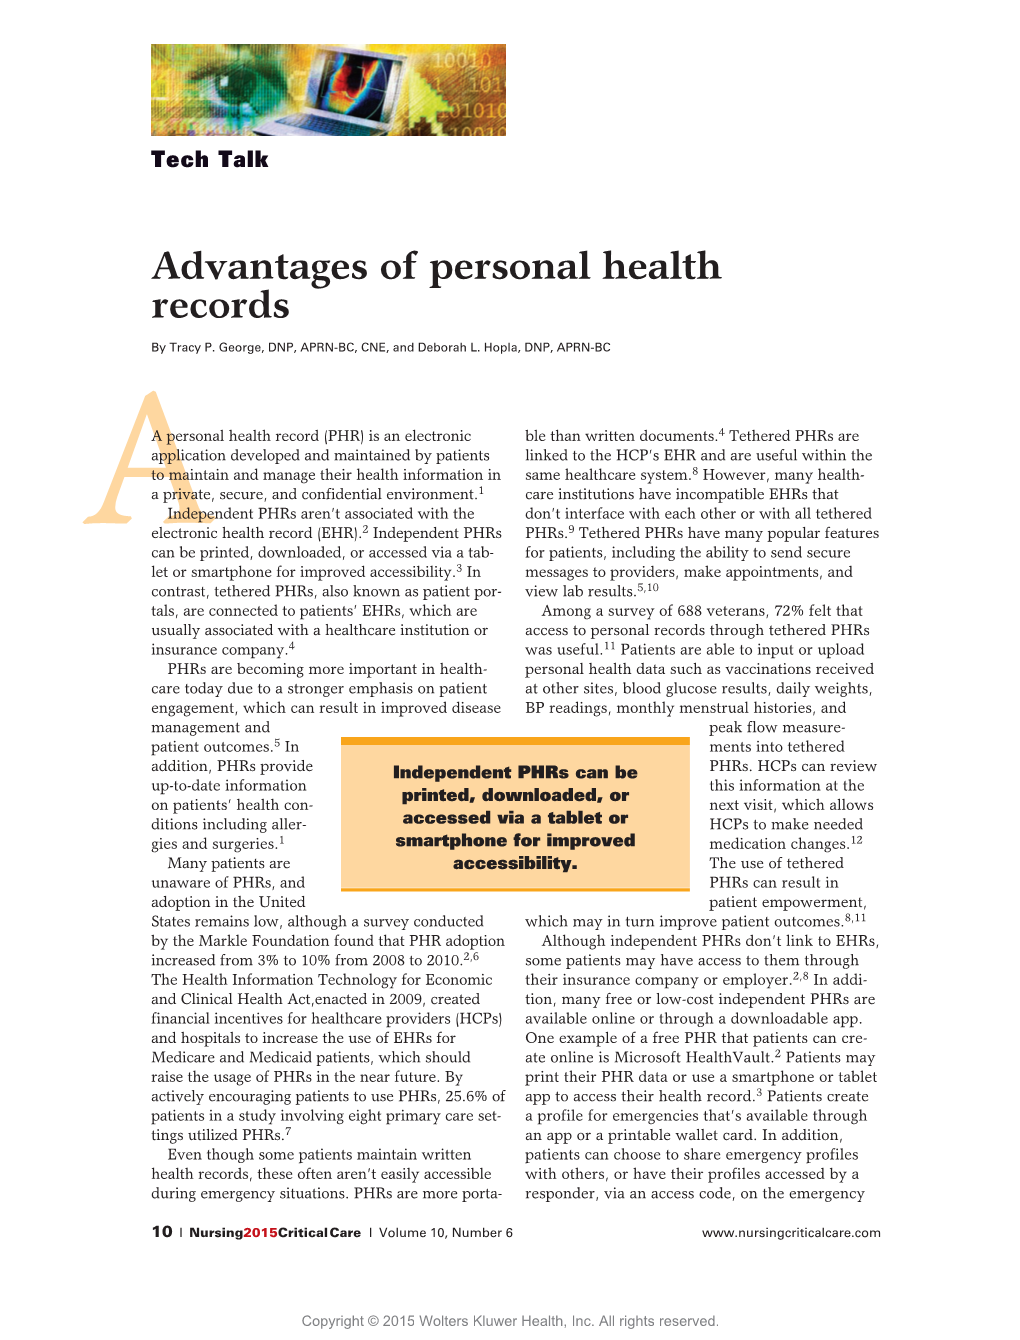 Advantages of Personal Health Records